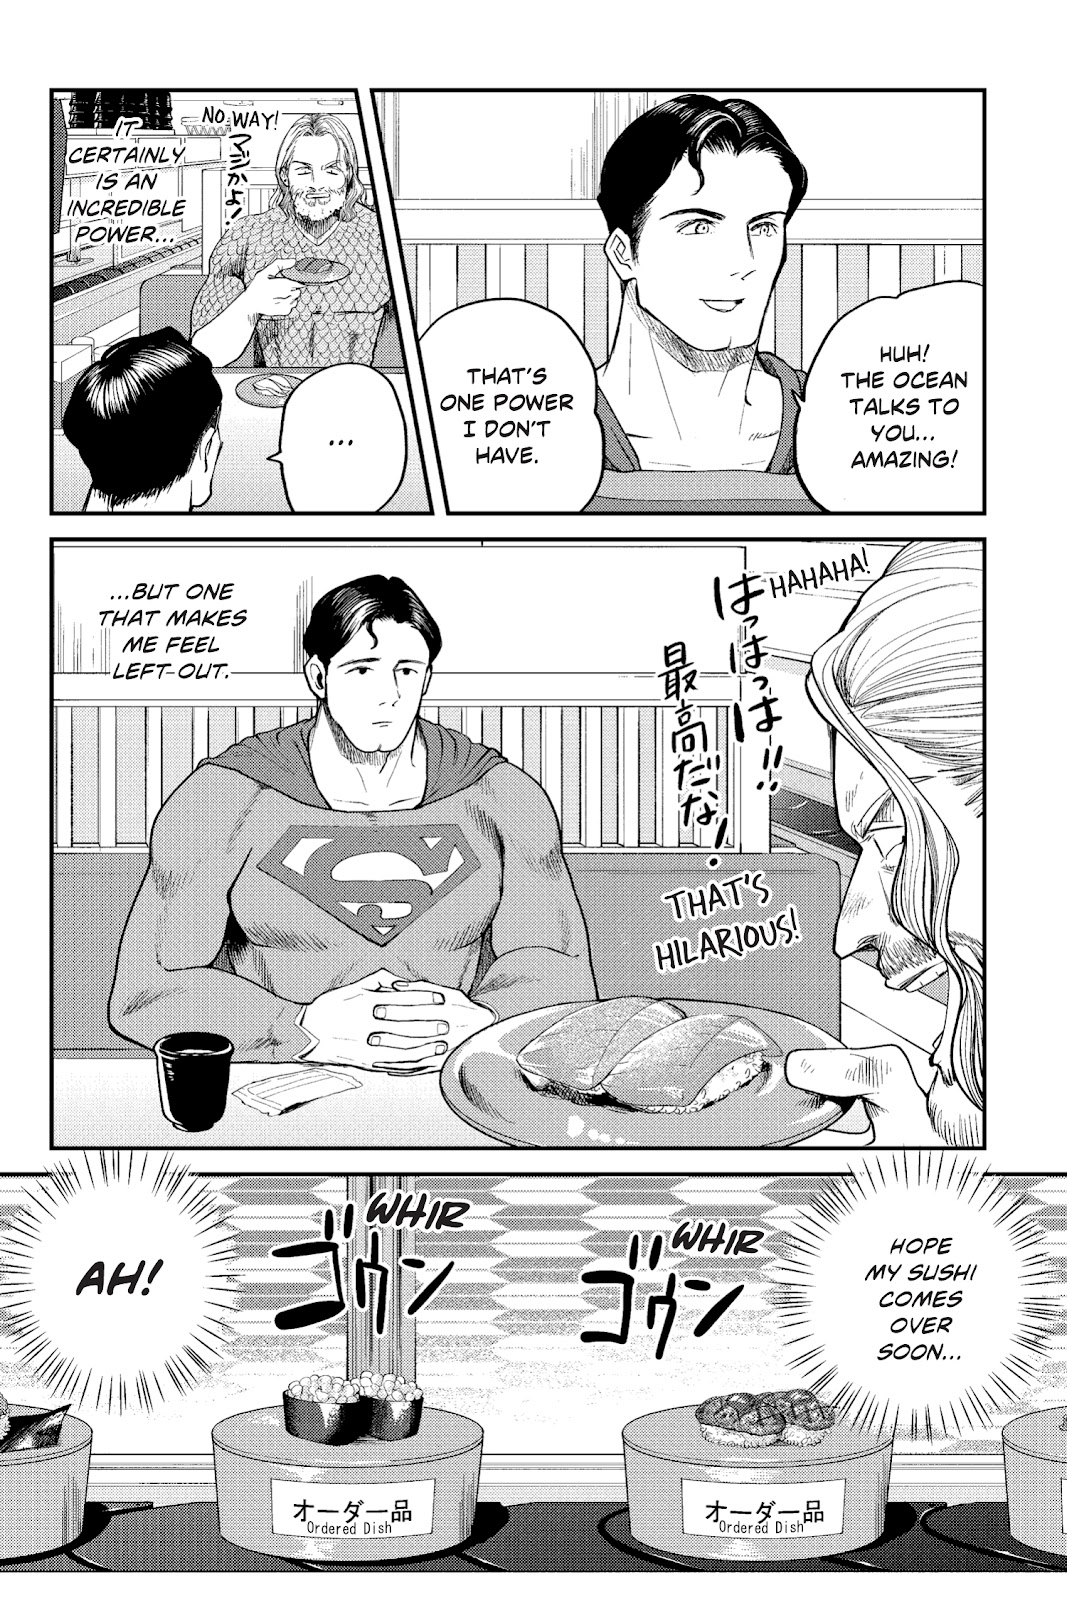 Superman vs. Meshi issue 6 - Page 9